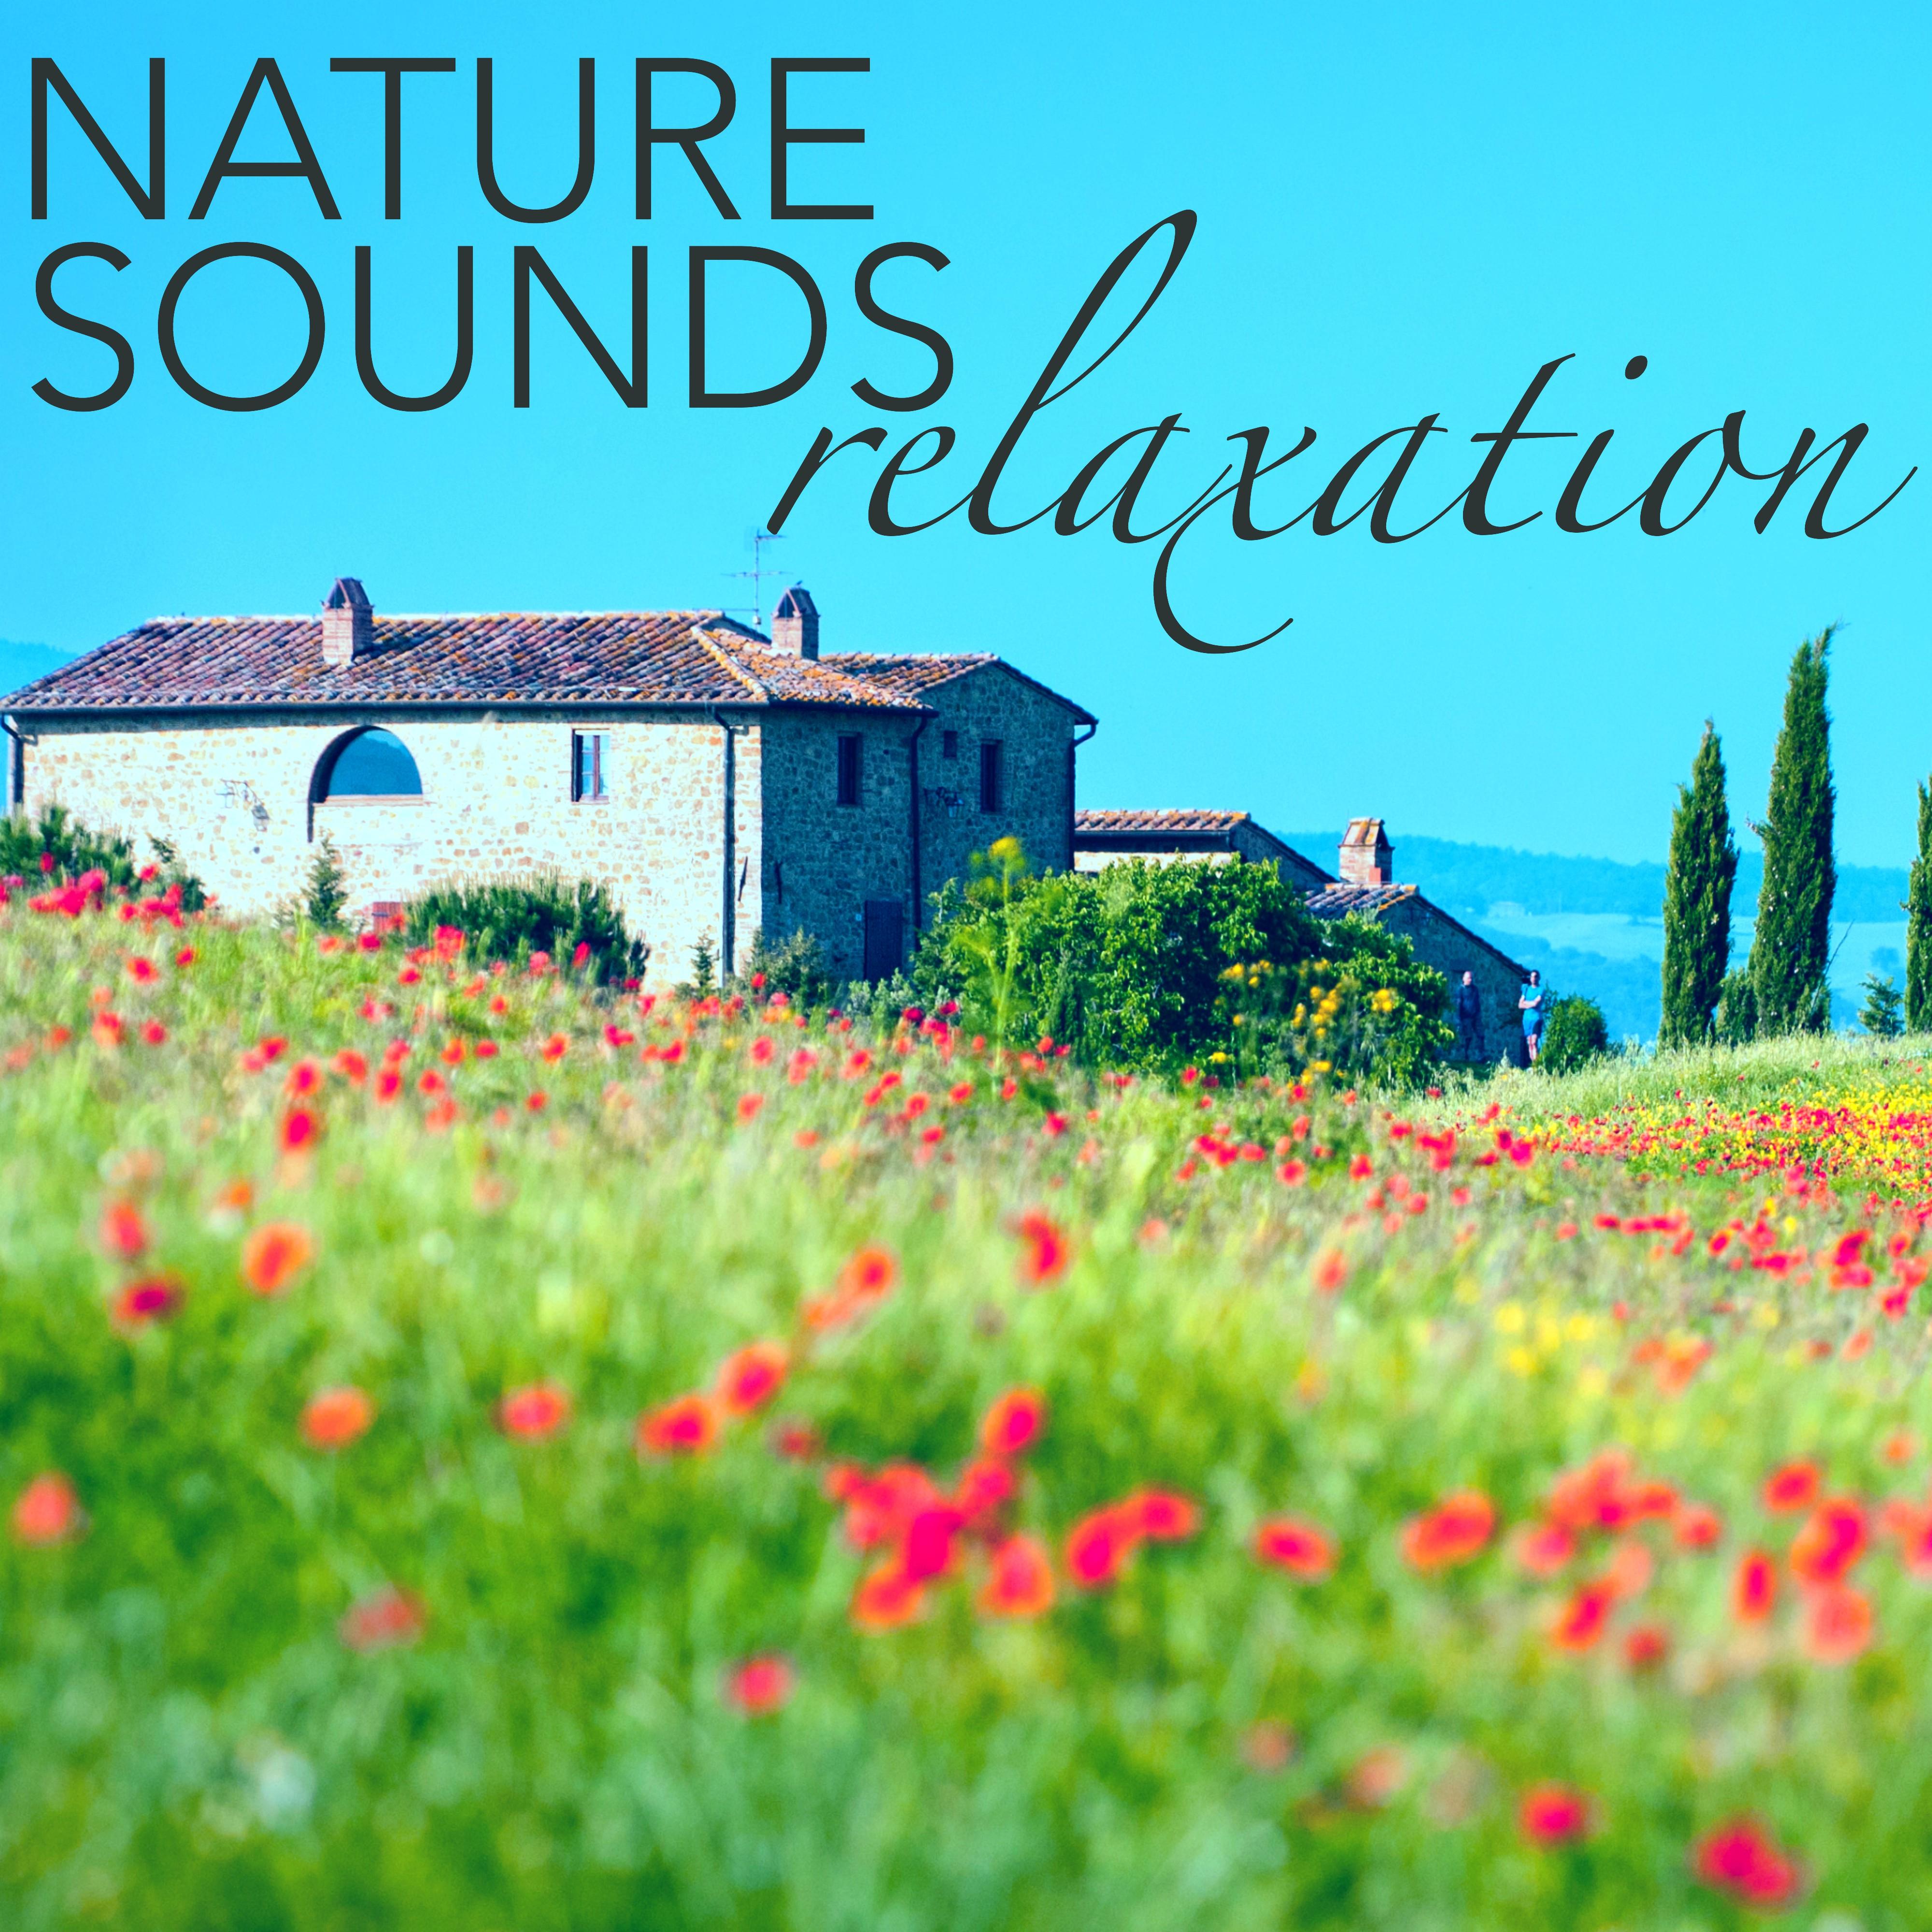 Nature Sound for Relaxation - Running Water Stream, Relaxing Ocean Waves & Birds Sound Therapy for Placebo Effect & Deep Sleep